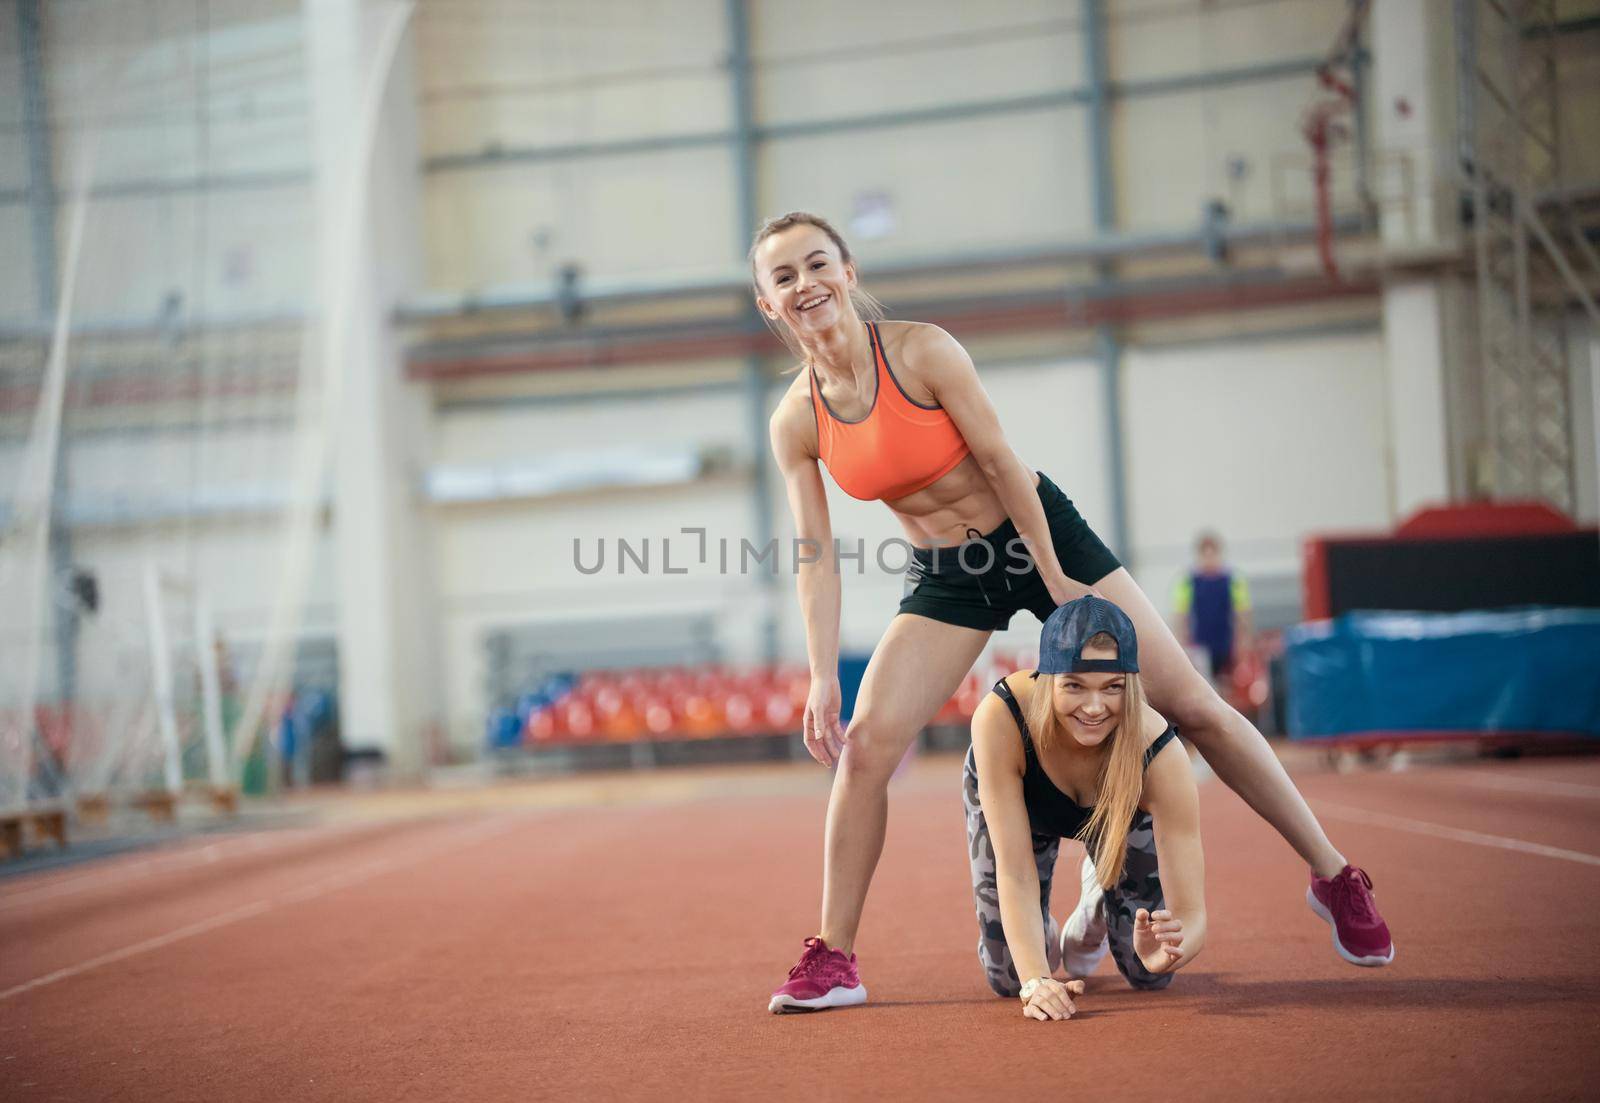 Two young women doing exercises and warming up together. Mid shot